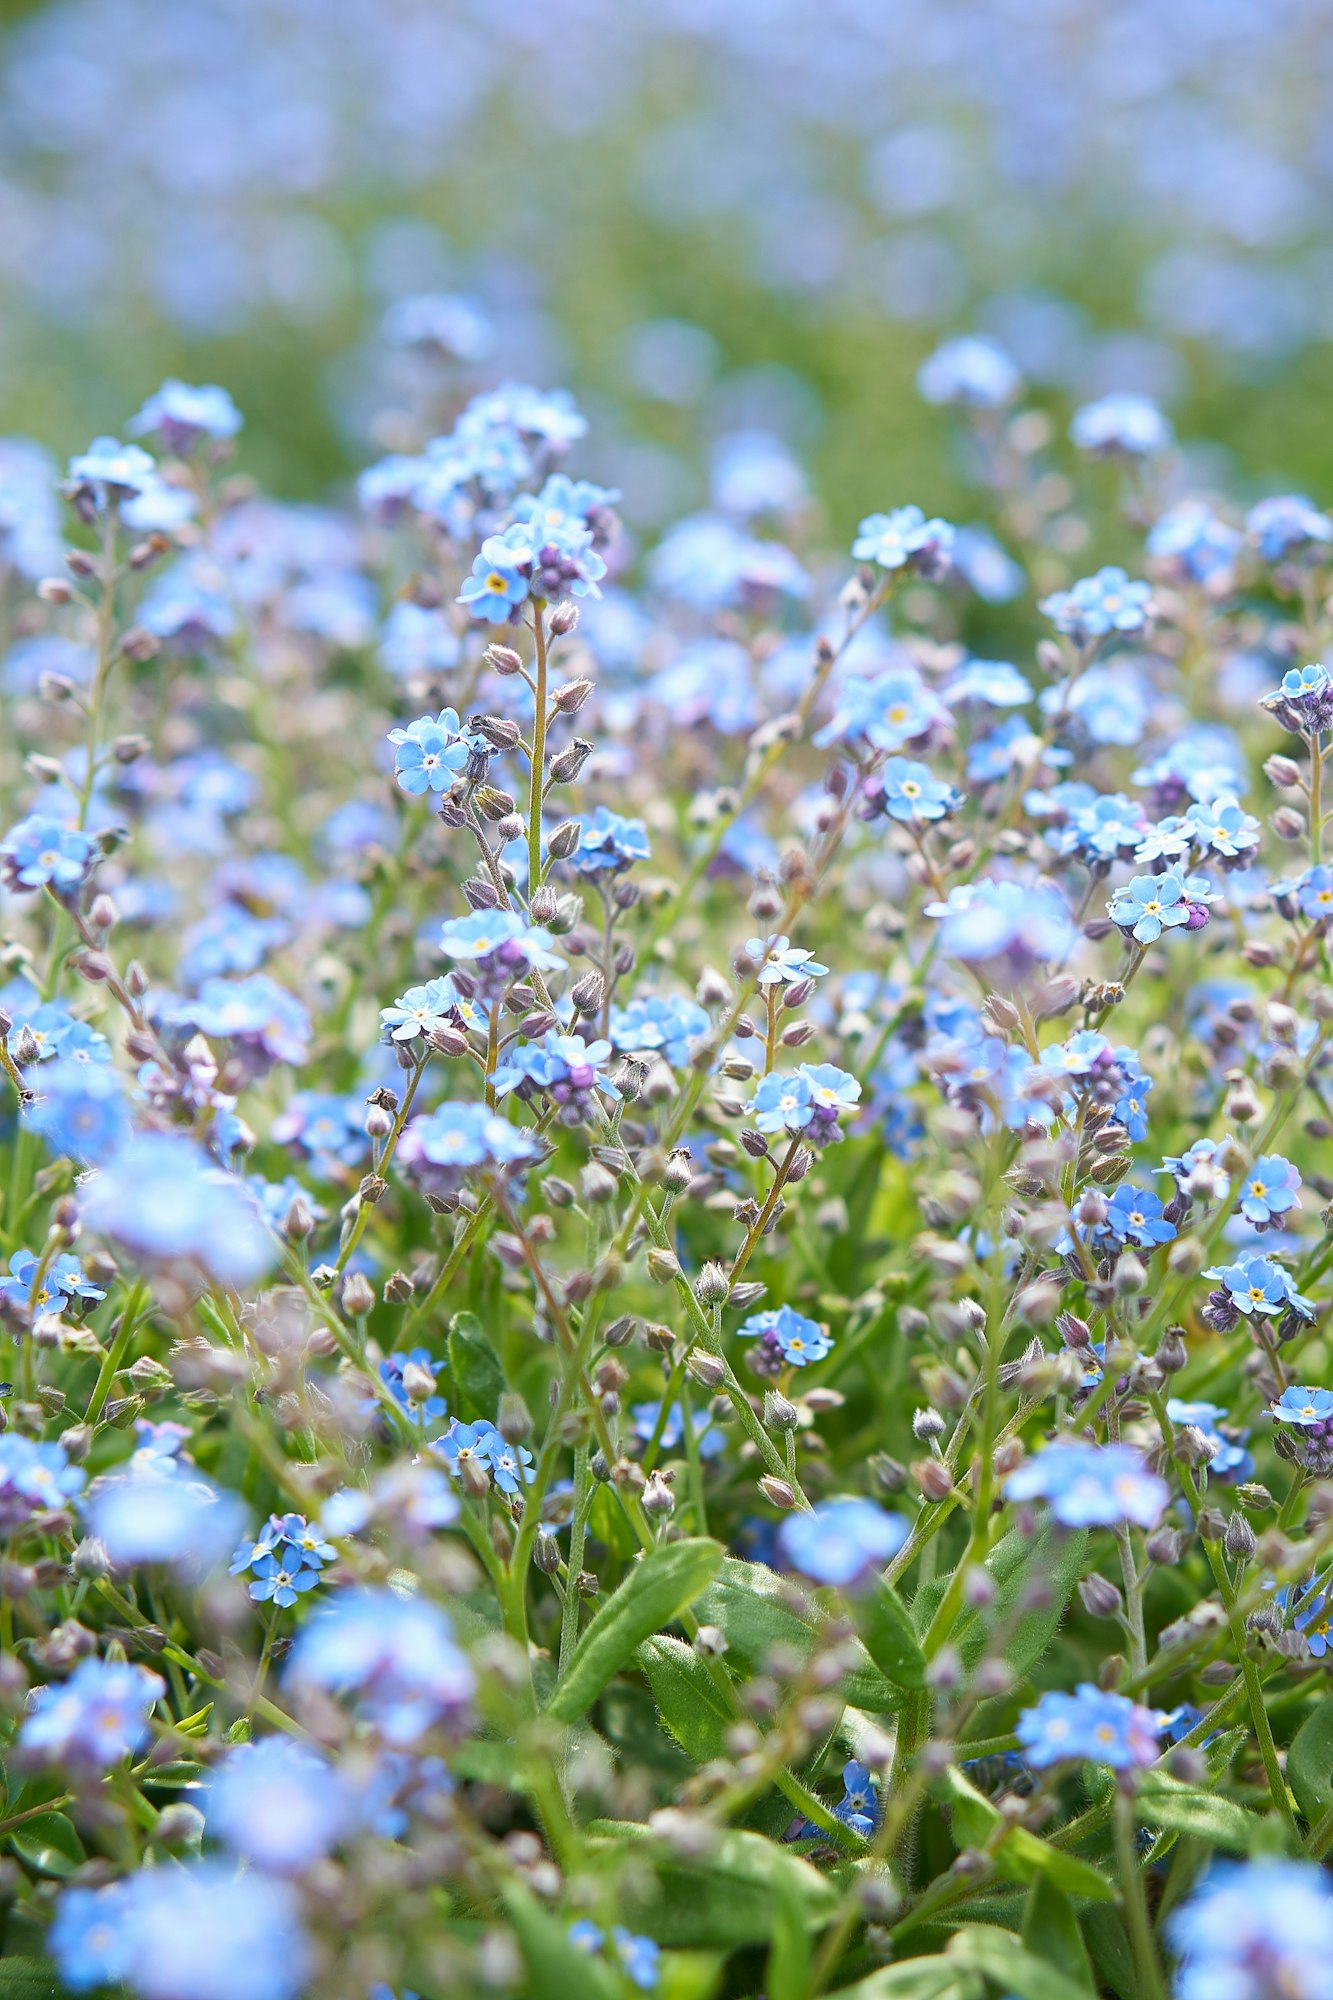 Field of blue forget-me-not flower